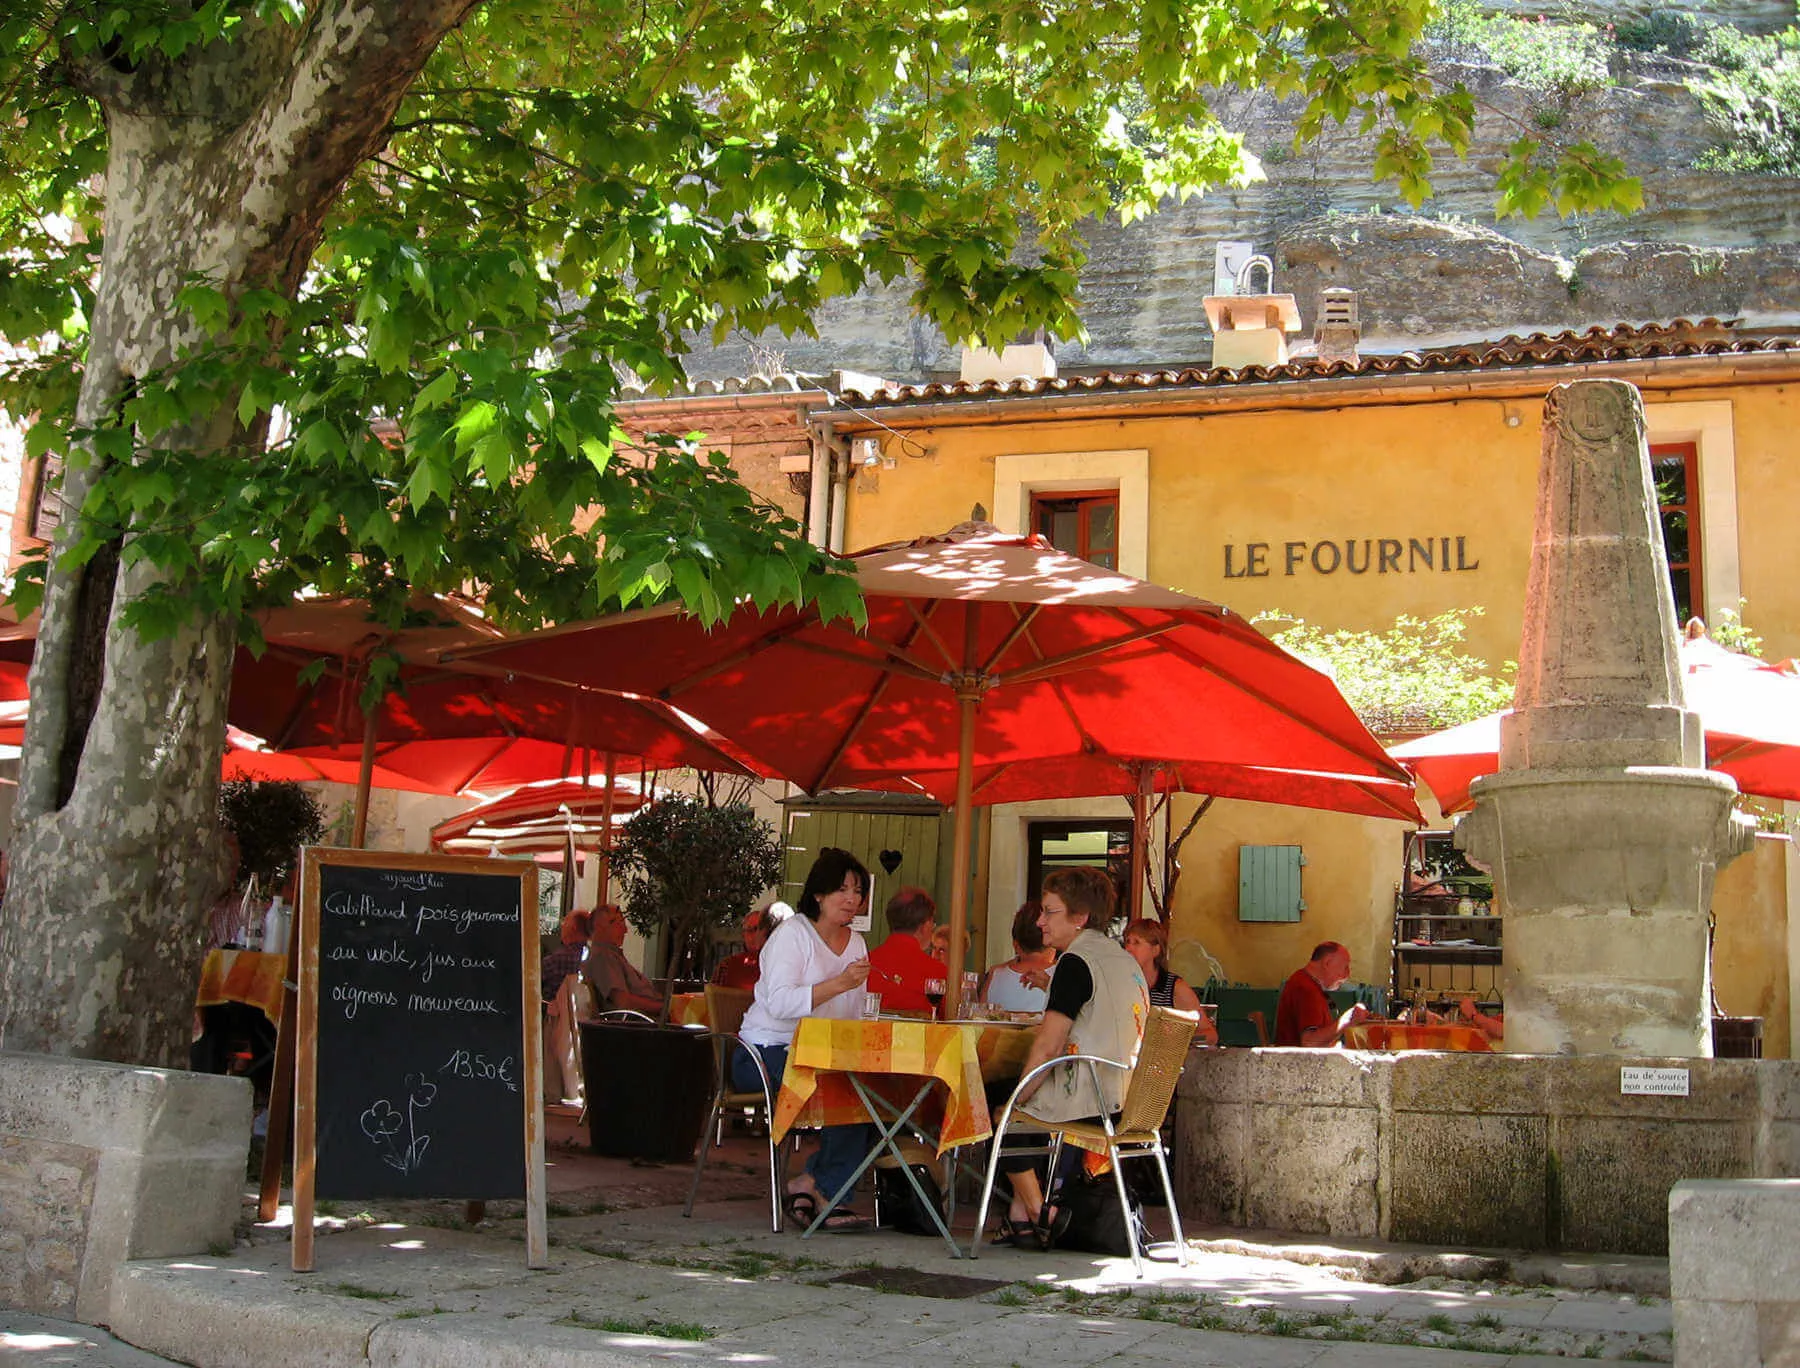 Splurging at a French restaurant often includes dining leisurely at an outdoor table